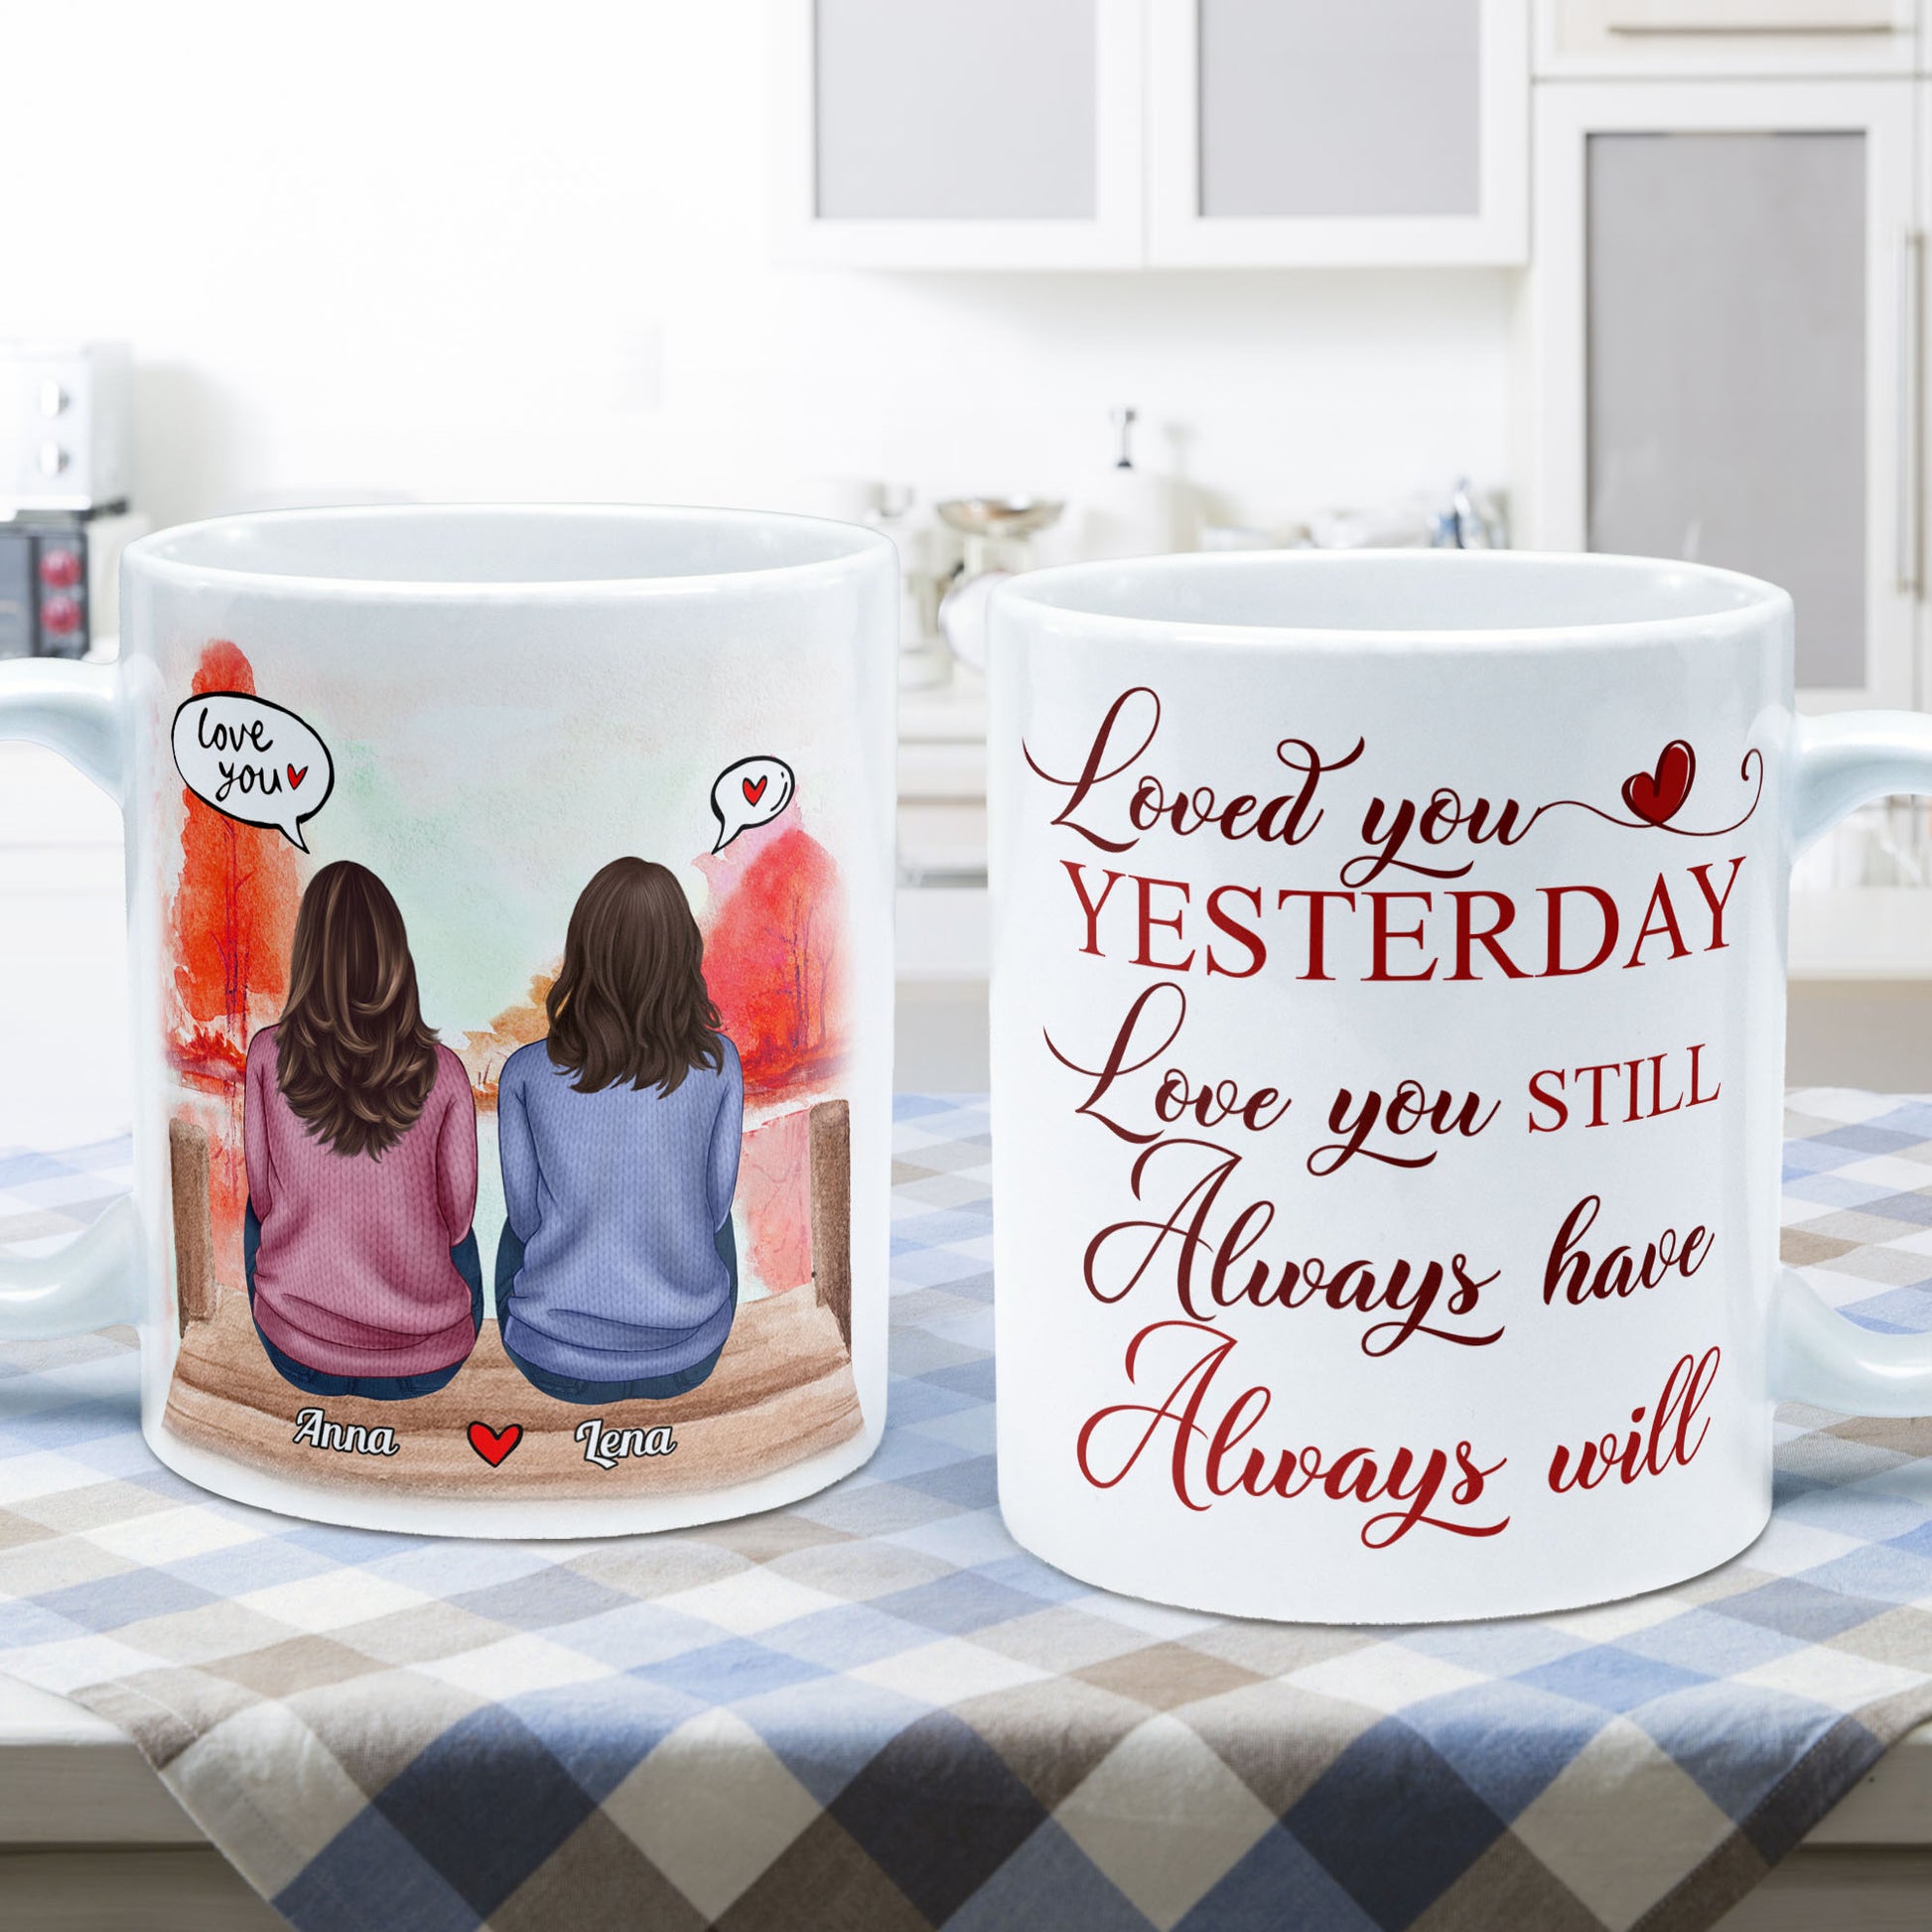 Loved You Yesterday, Love You Still - Personalized Mug - Anniversary, Valentine's Day Gift For Spouse, Partner, LGBTQ+